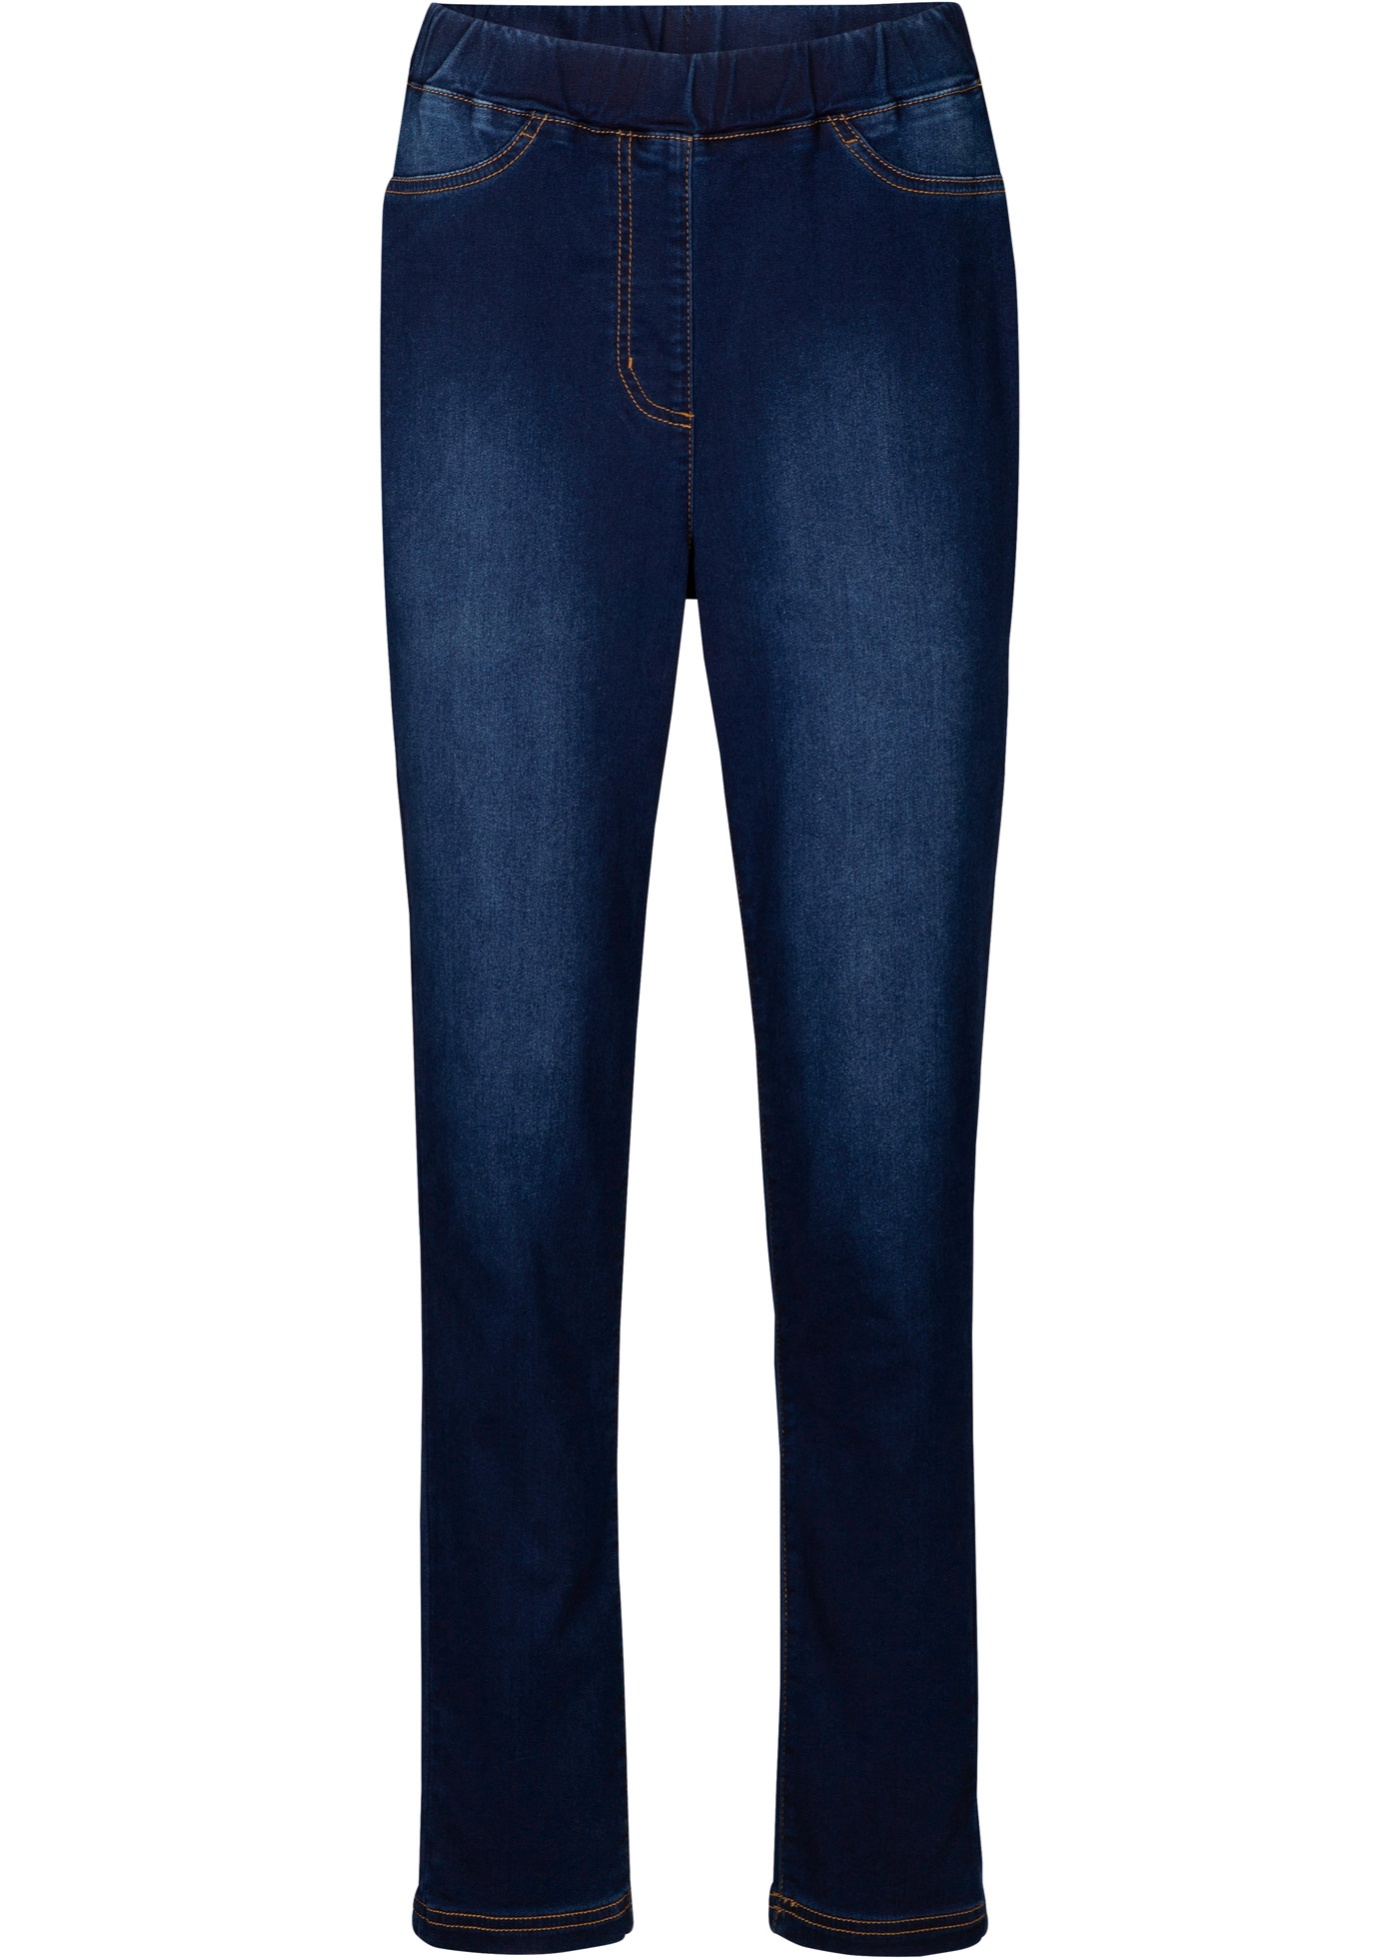 jegging taille haute avec fonction thermo-stretch, taille confortable